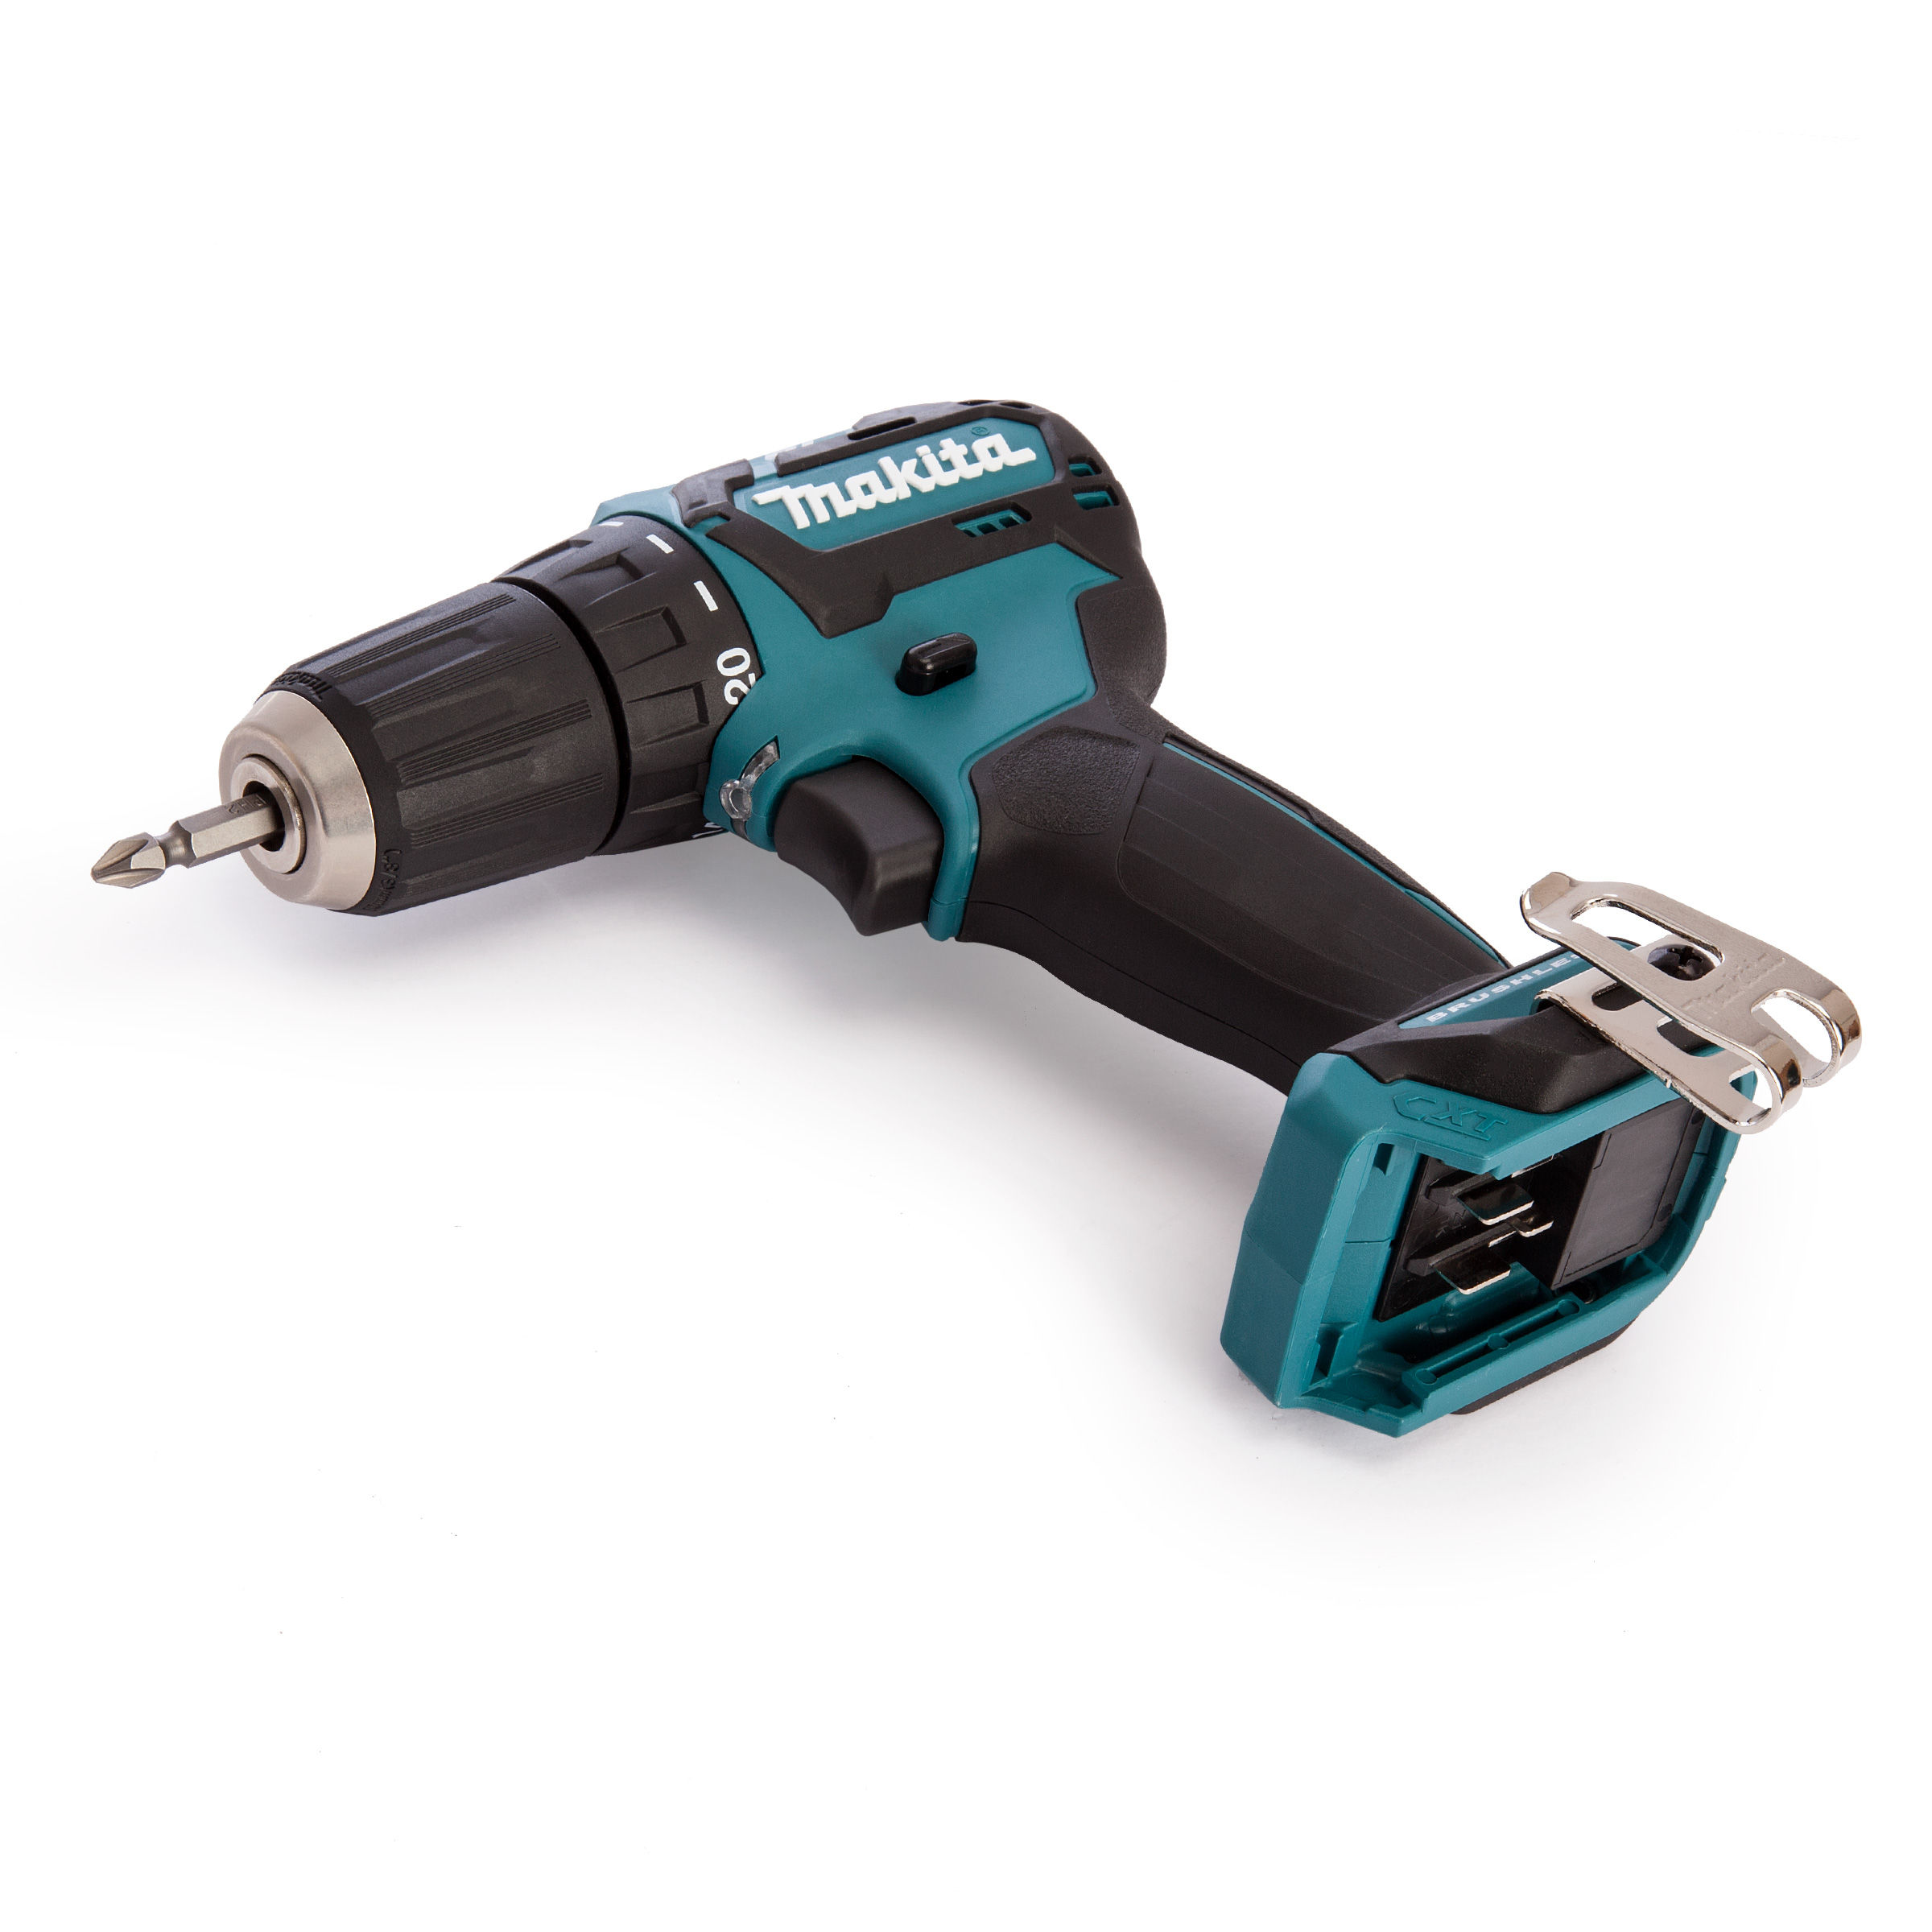 10.8 v drill driver review